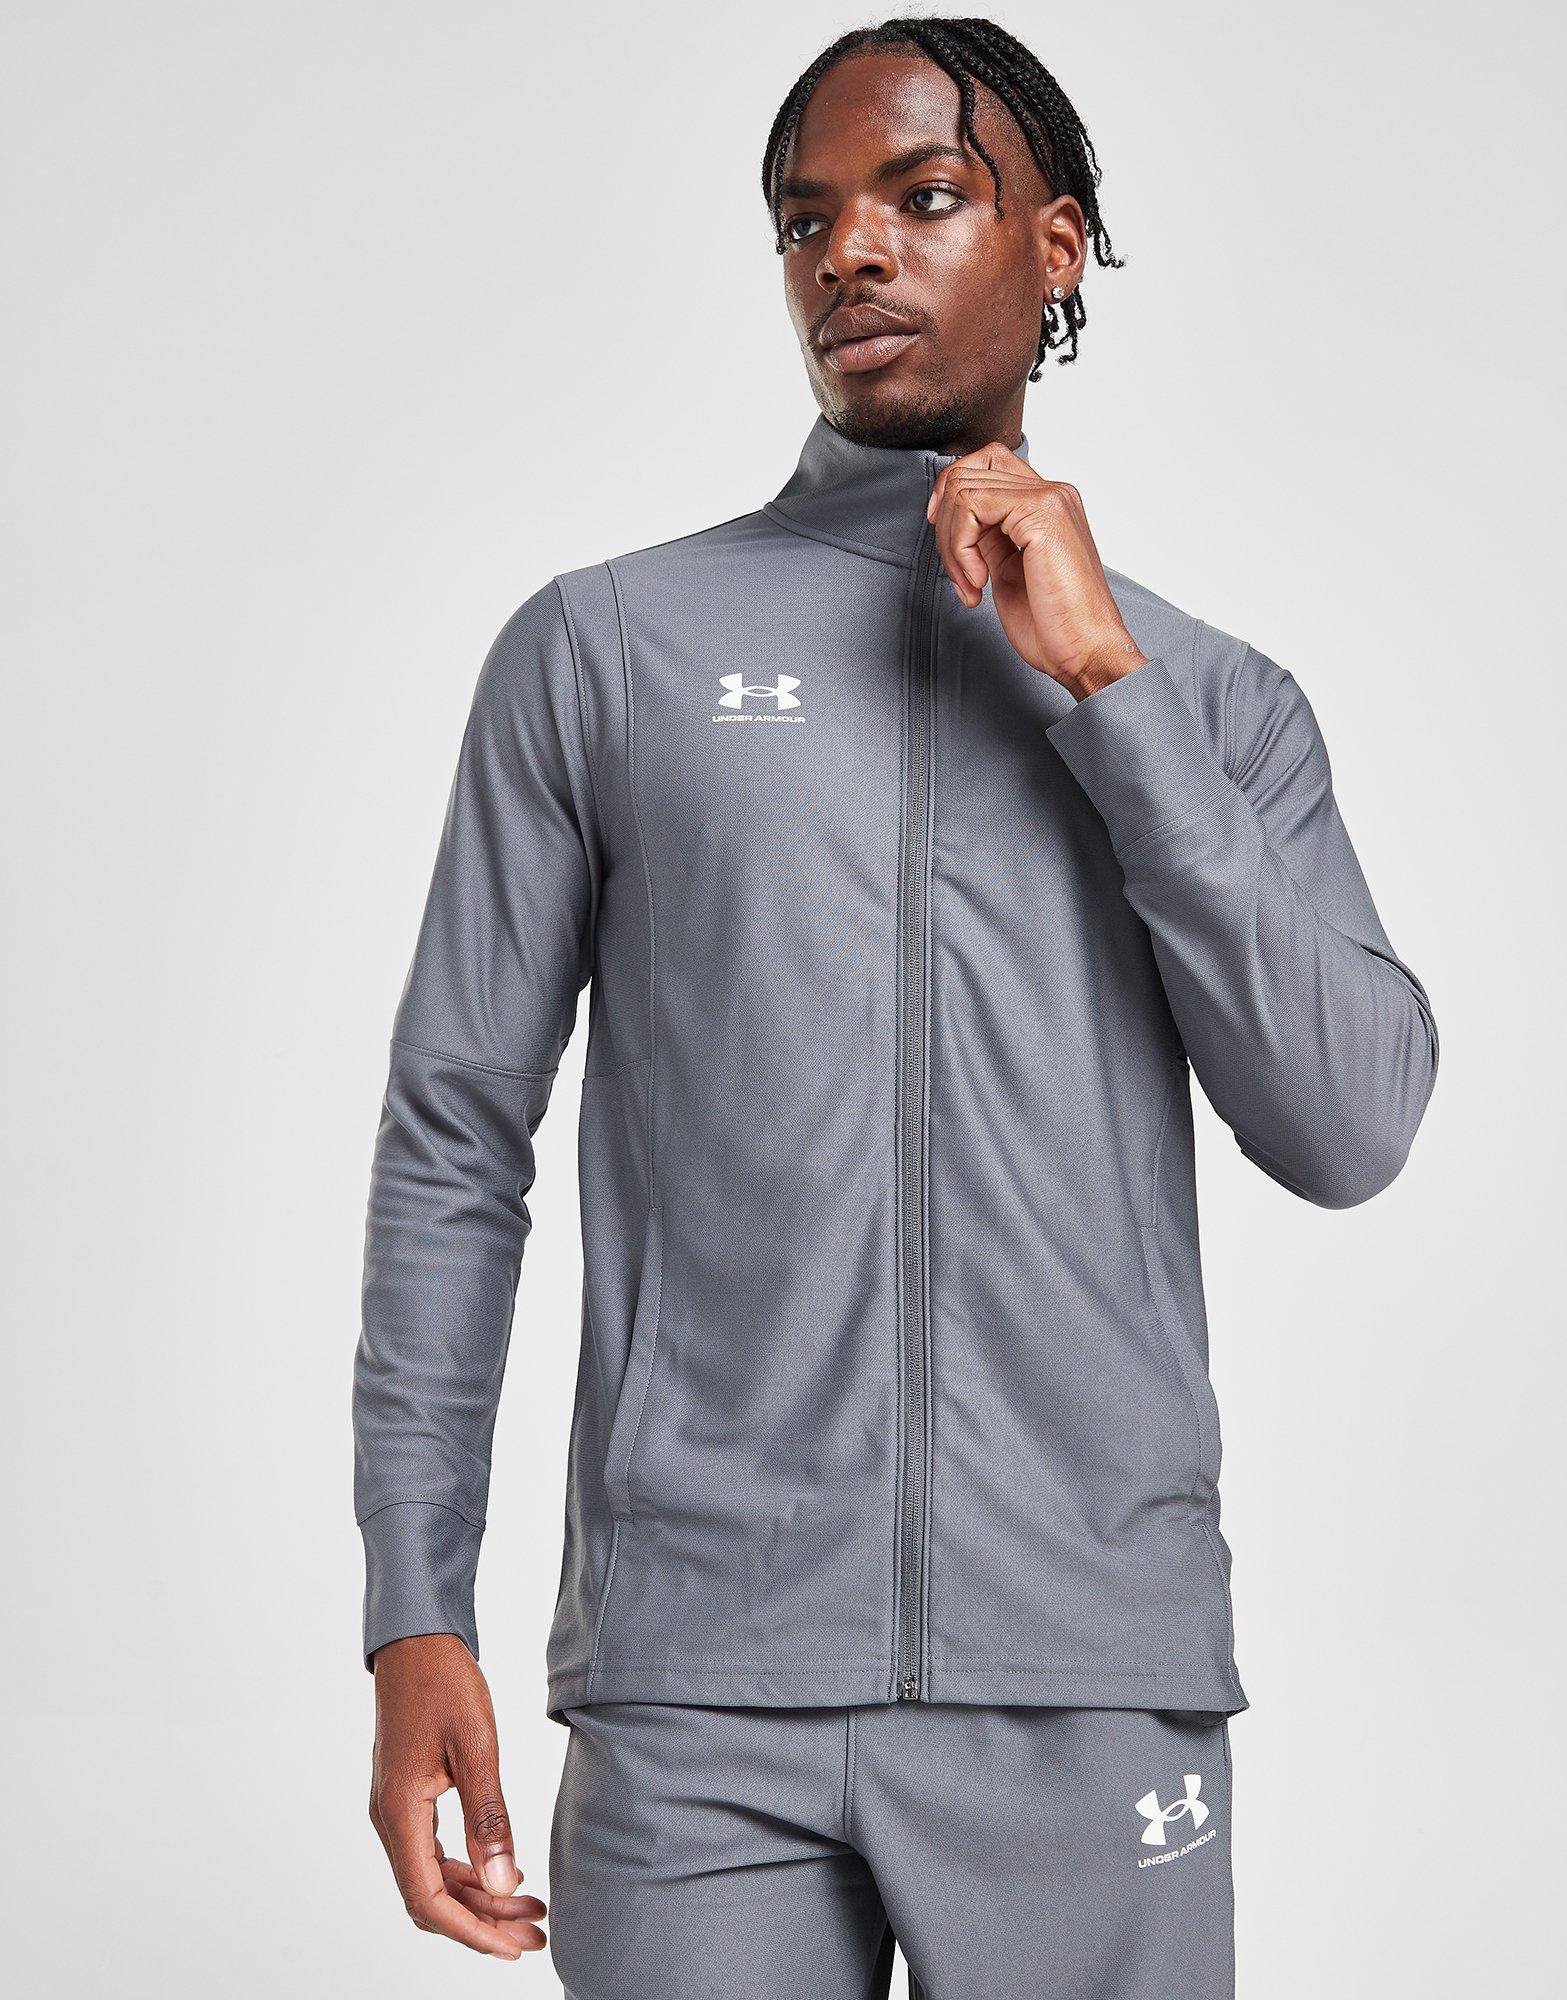  Under Armour Men's Challenger Tracksuit, Pitch Gray